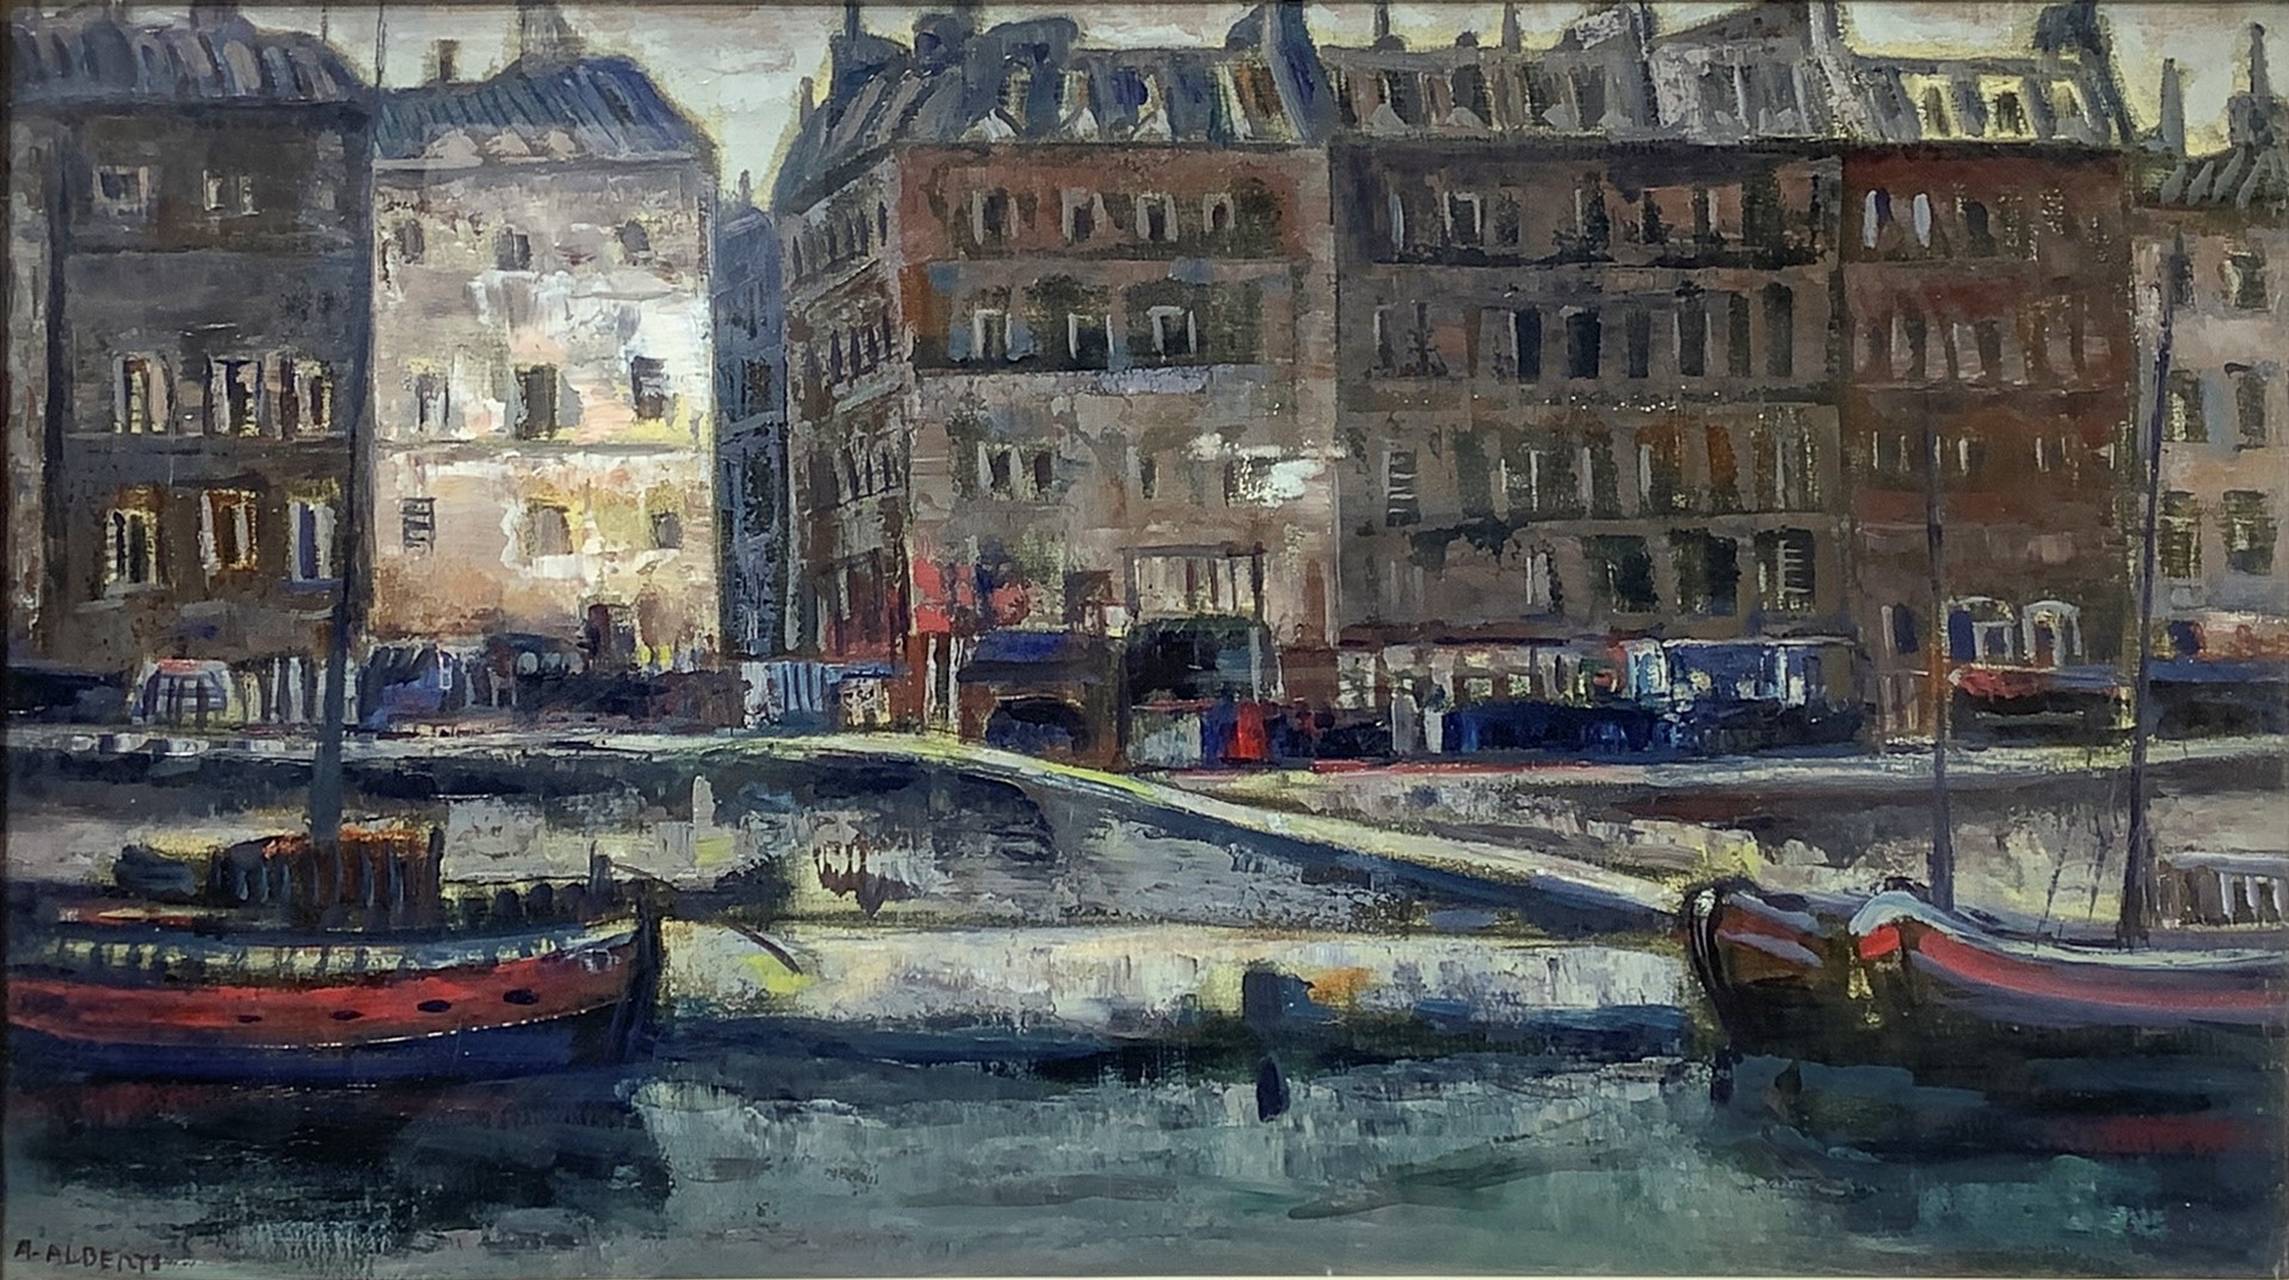 Antonio Alberti Oil painting on canvas depicting boats on the Seine in Paris, Signed on the lower le